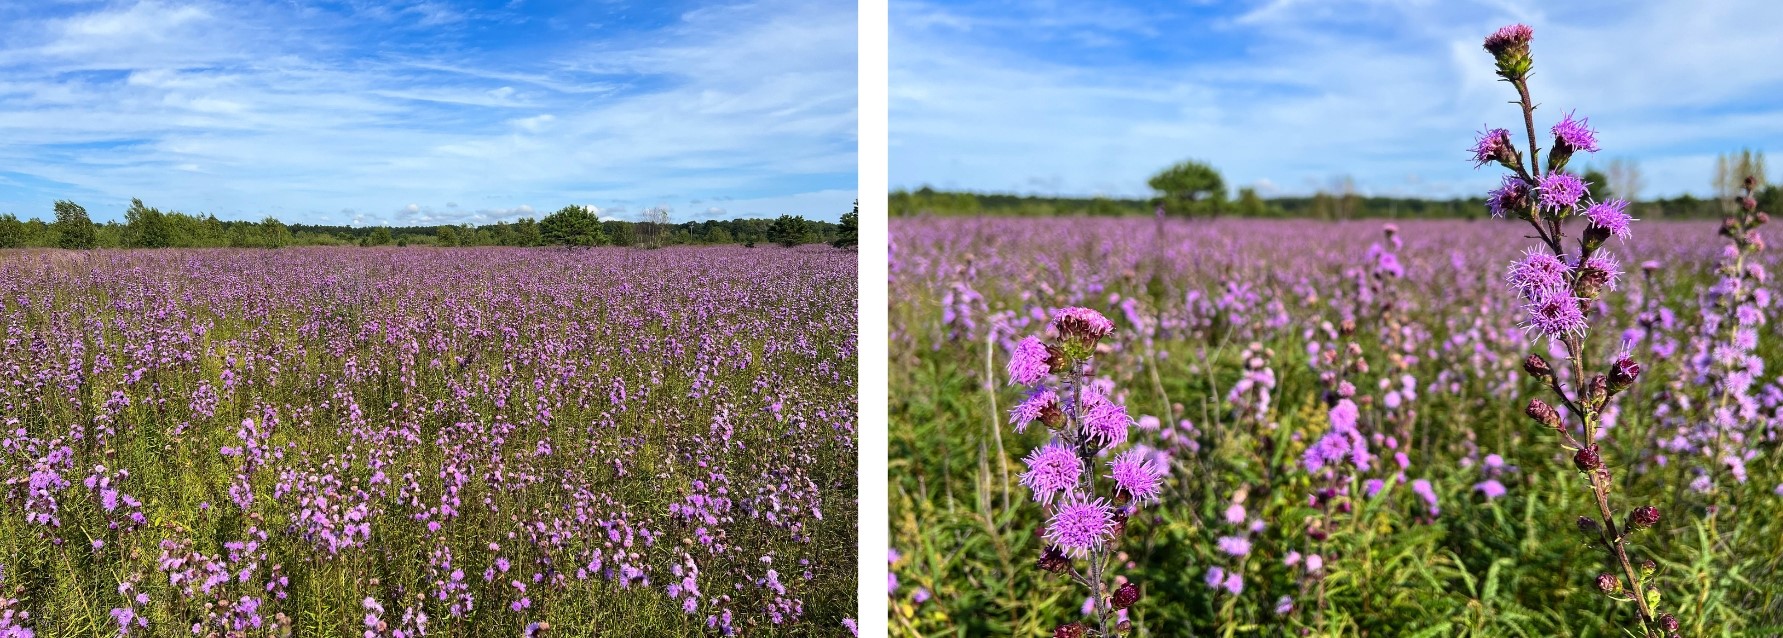 Purple flowers as far as the eye can see across a grassland.